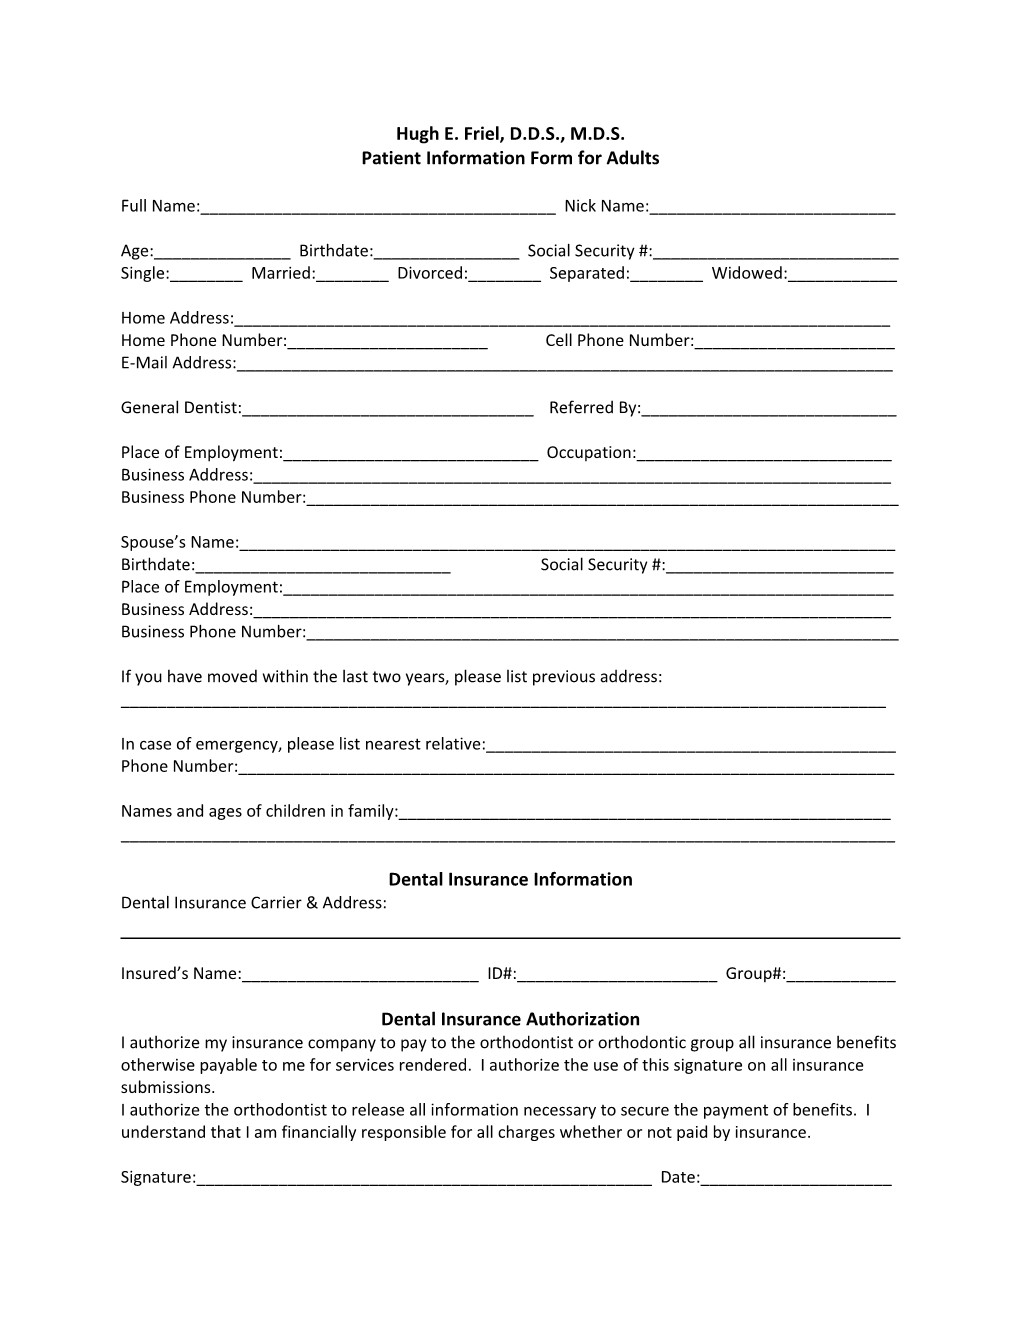 Patient Information Form for Adults